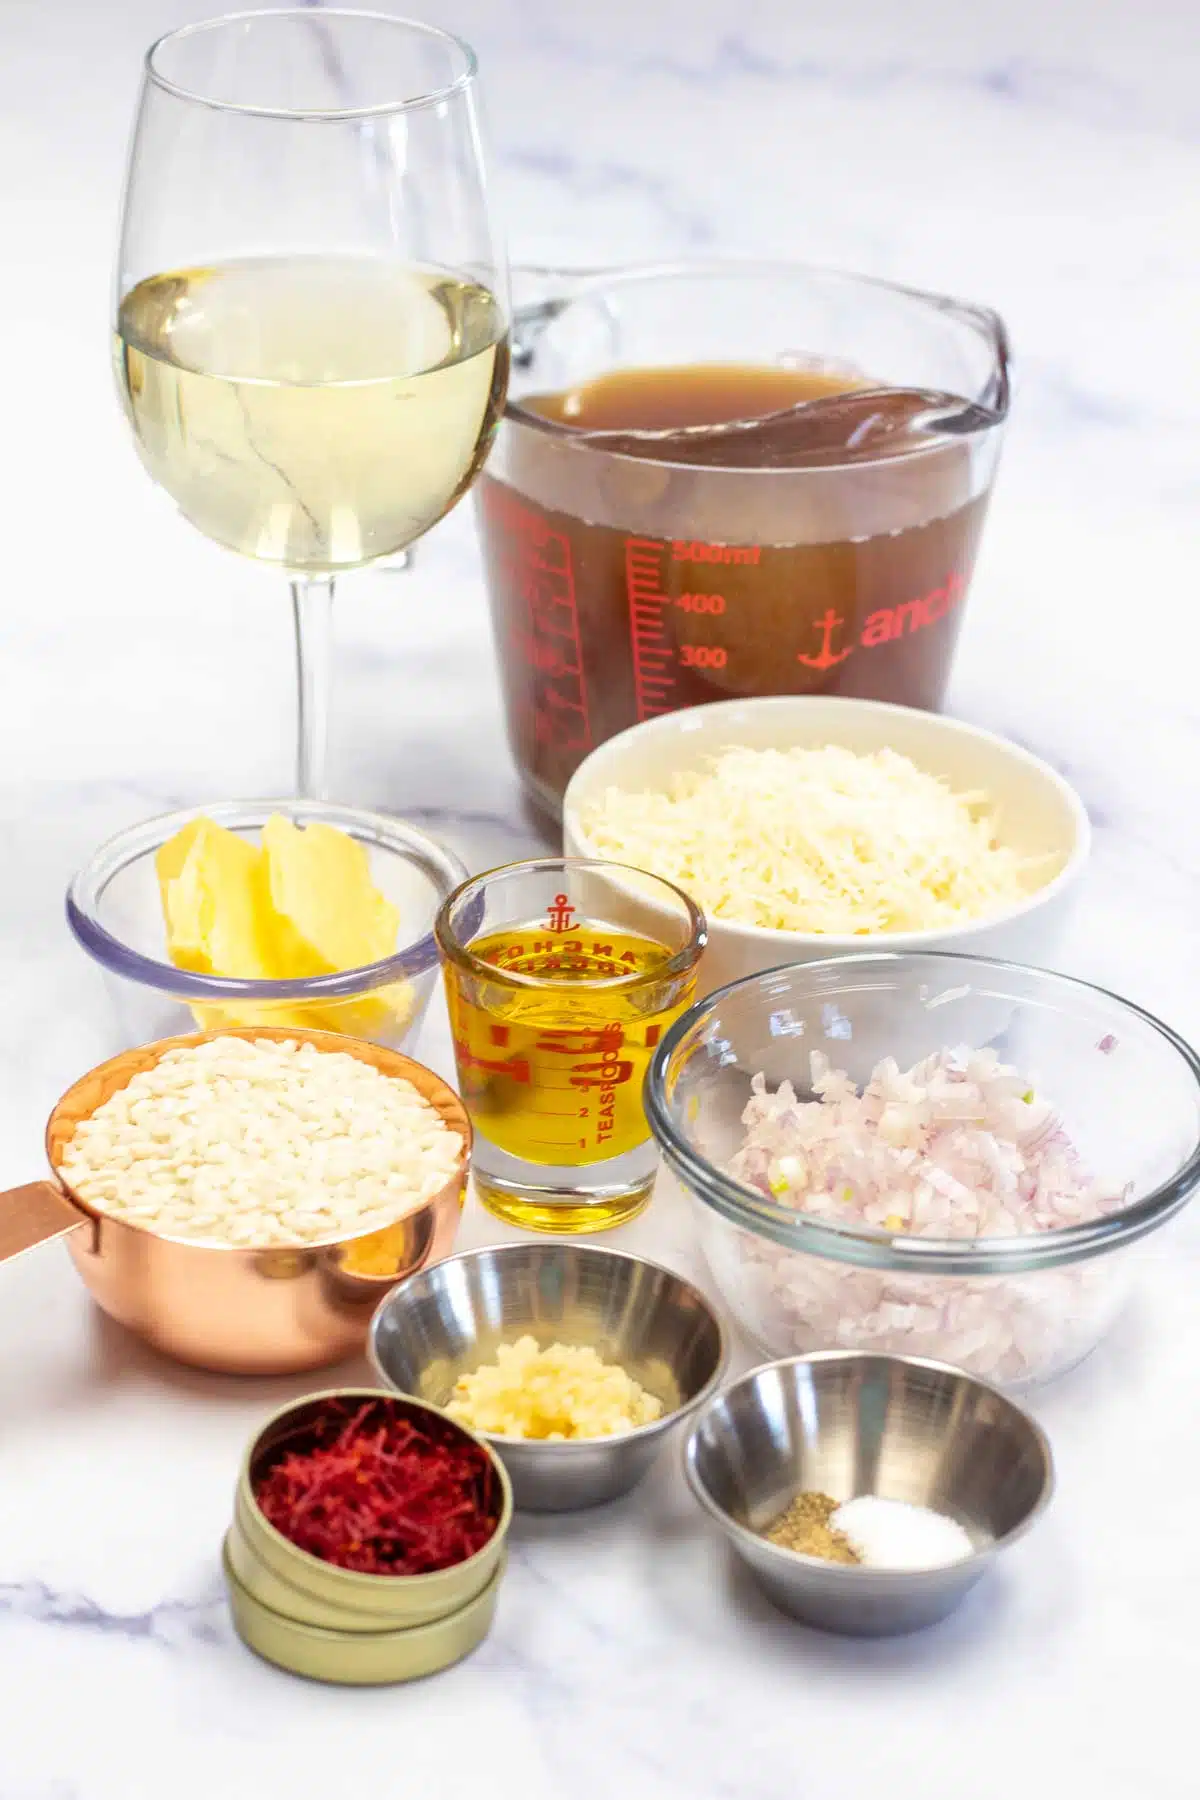 Tall image showing ingredients needed for saffron risotto.